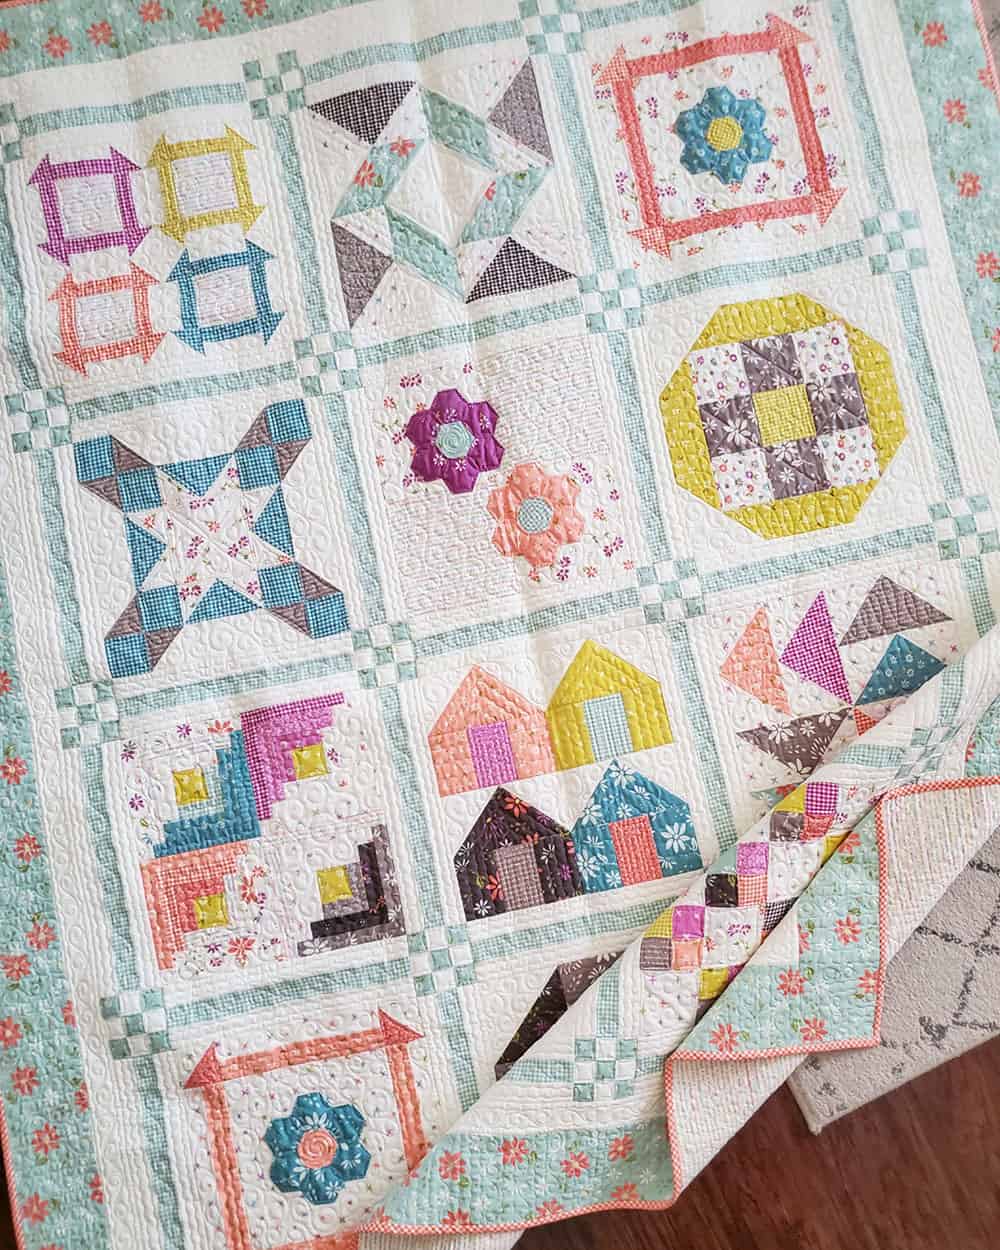 Summer Fun Block of the Month Quilt Featured by Top US Quilt Blog, A Quilting Life